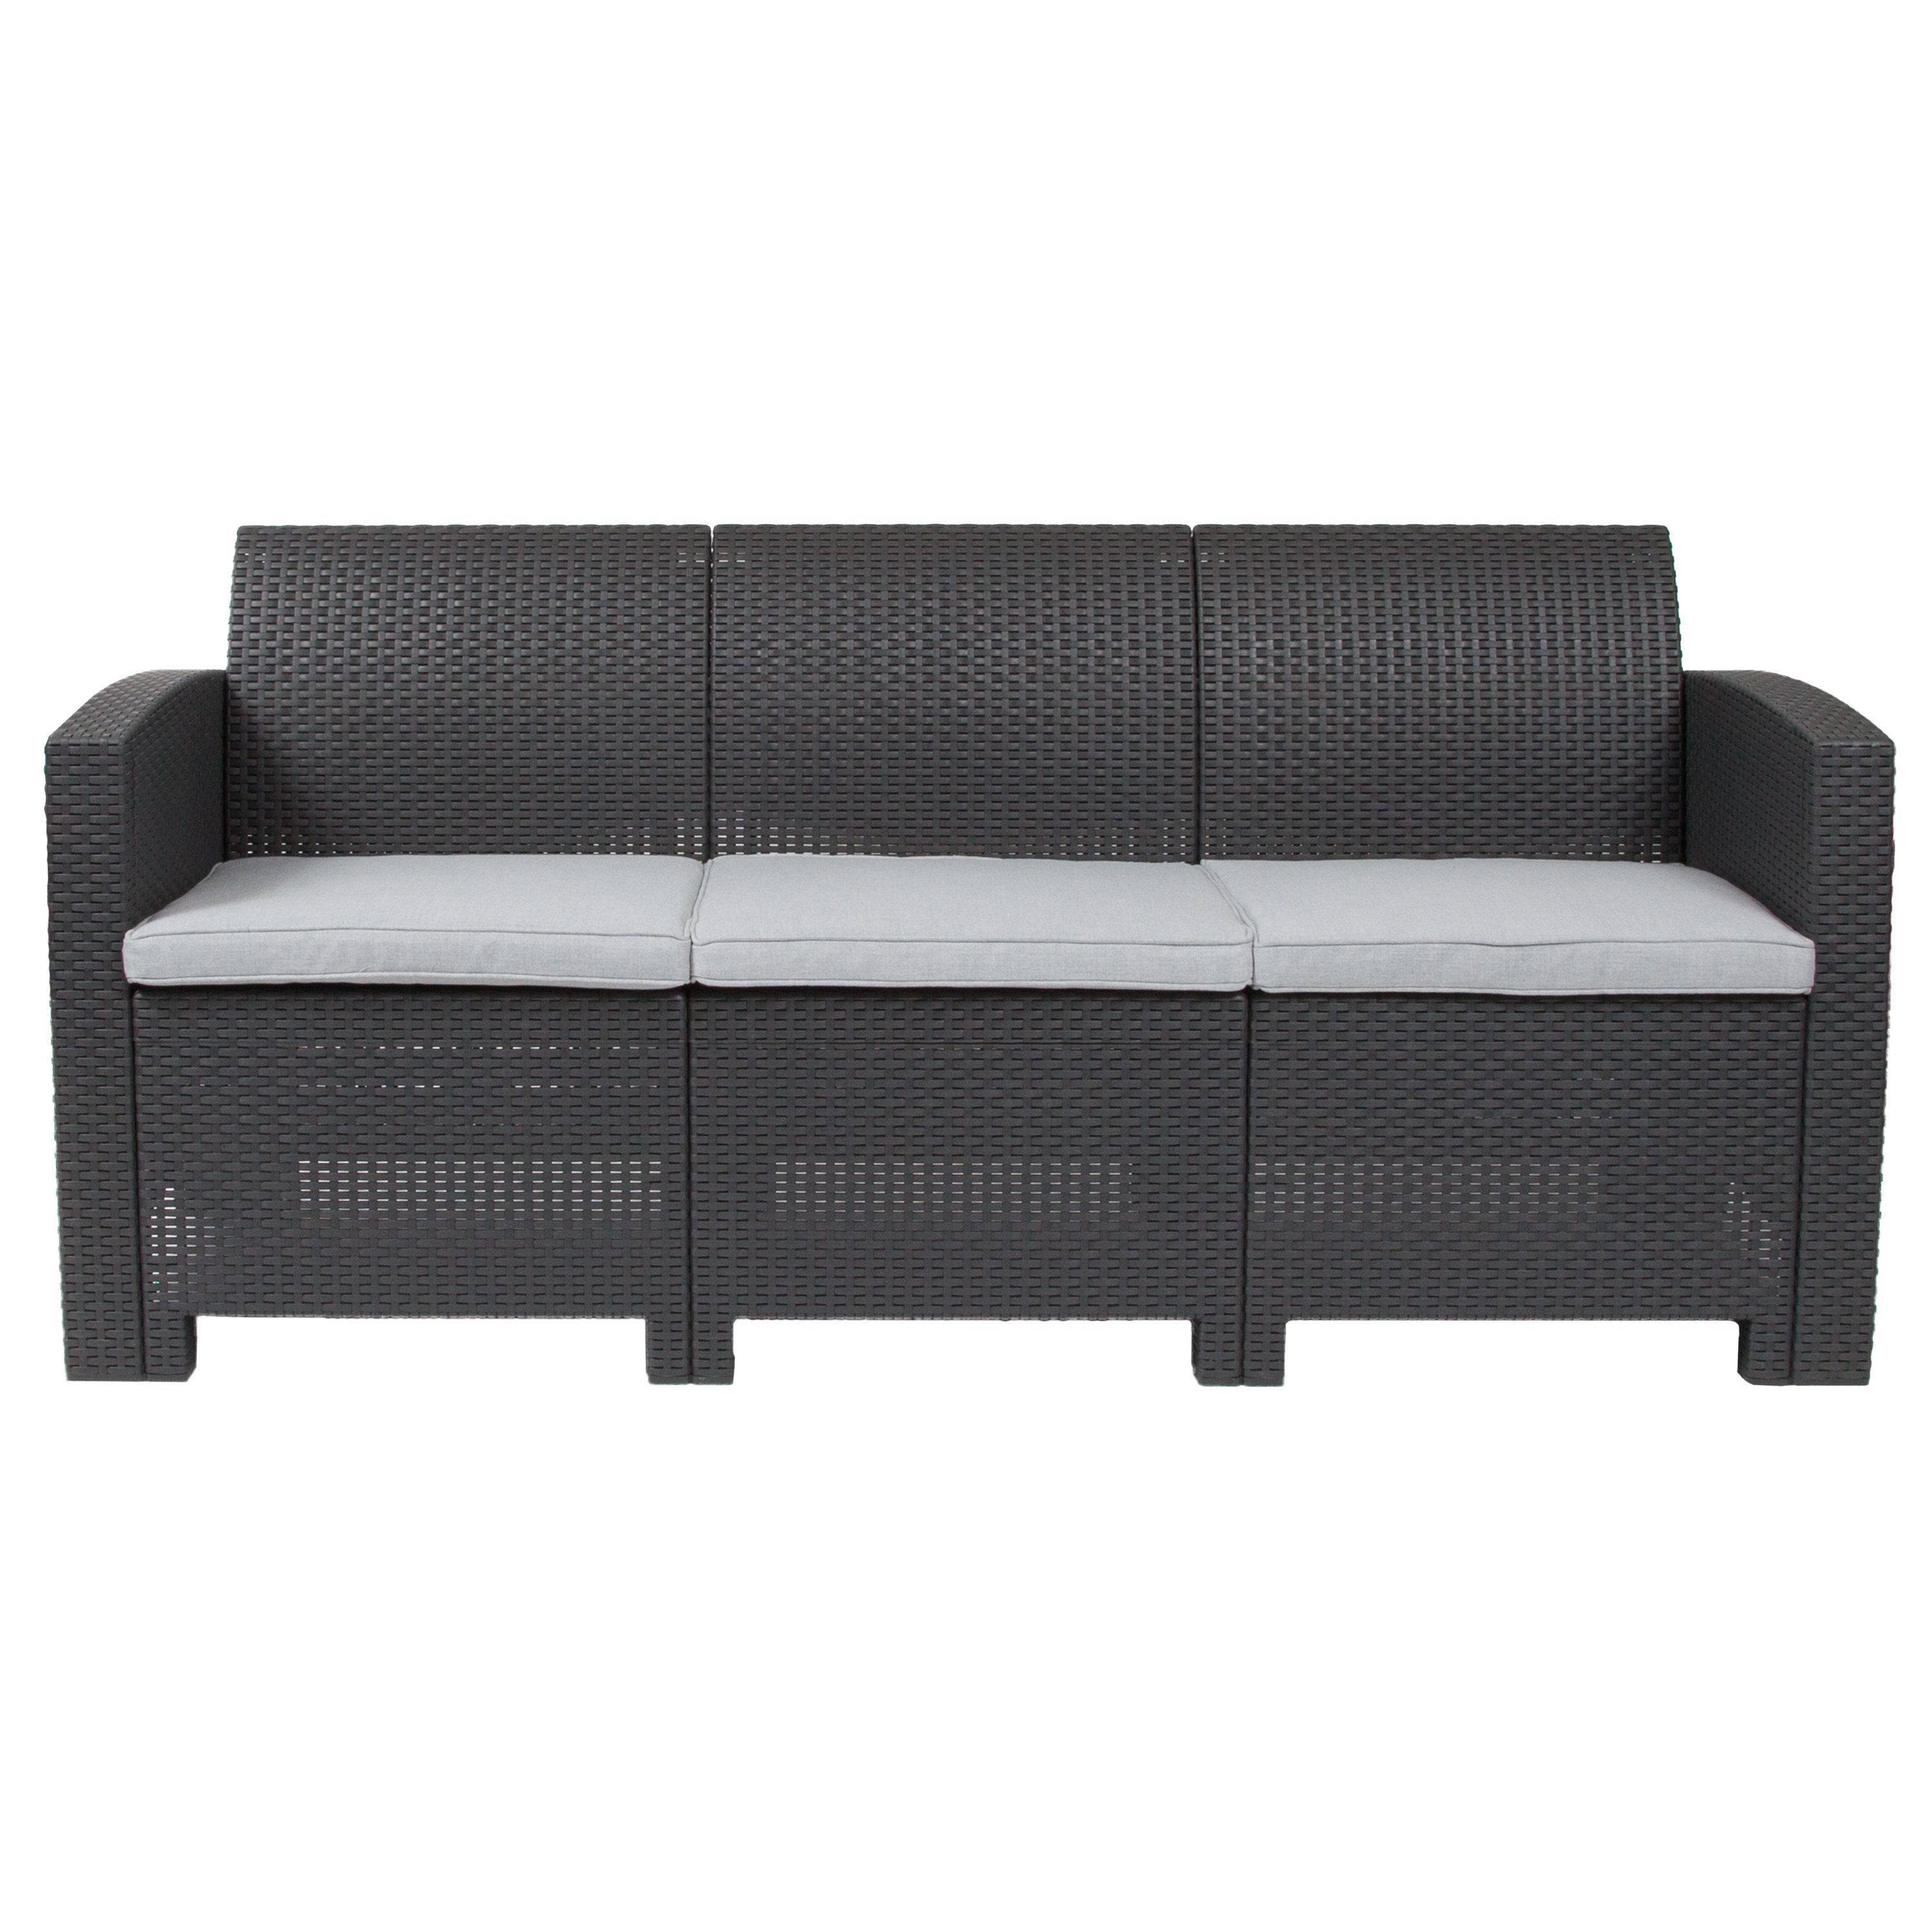 Most Recently Released Patio Sofas With Cushions Throughout Stockwell Patio Sofa With Cushions (Photo 15 of 20)